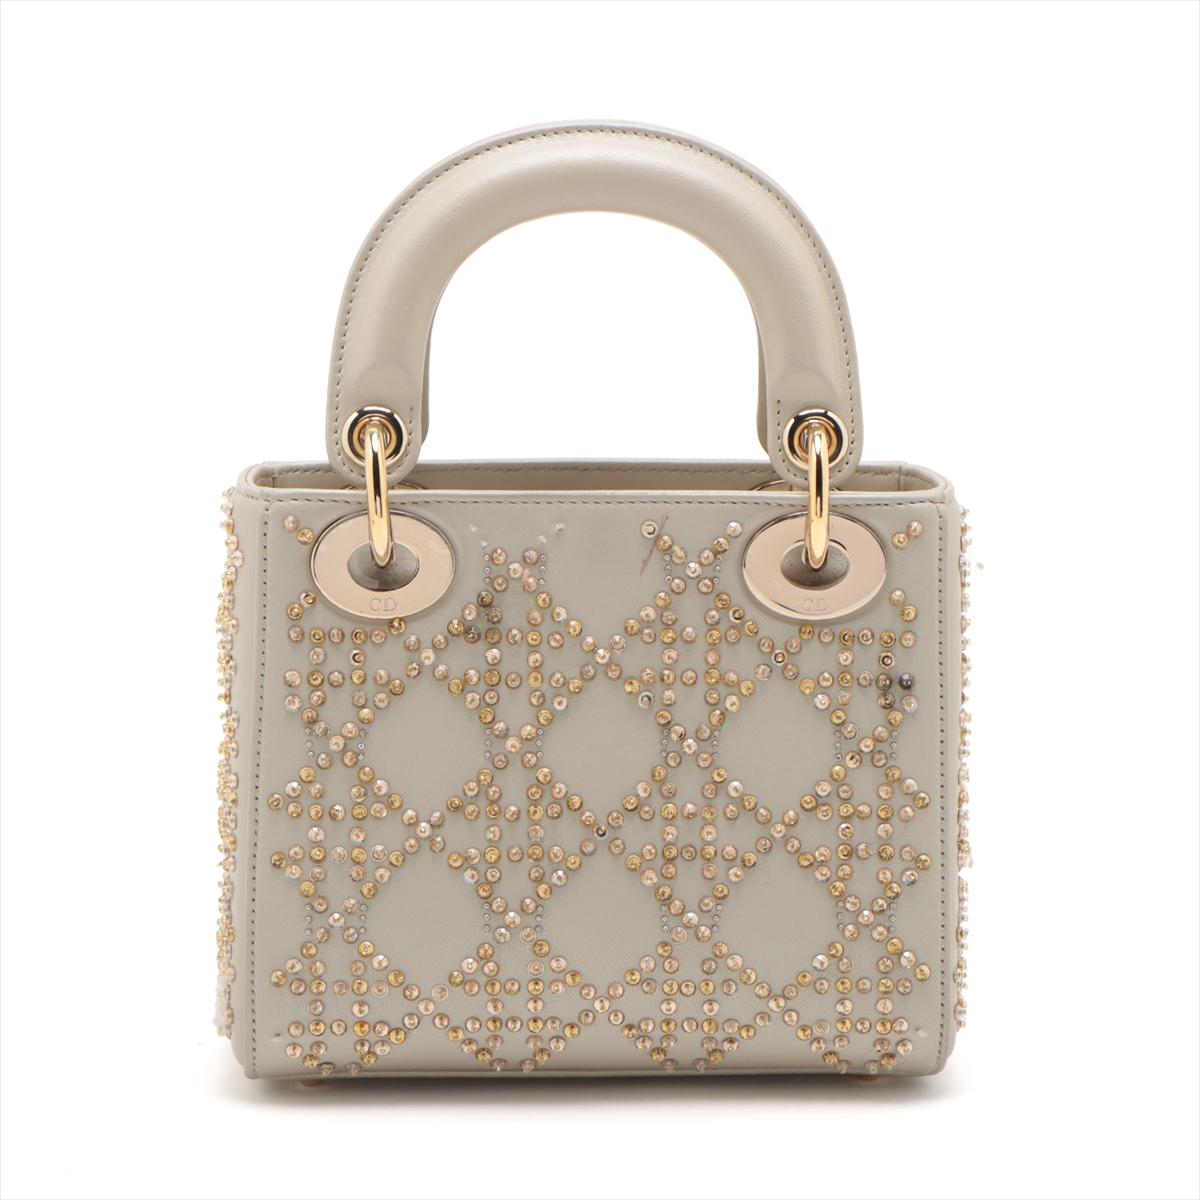 *RETAIL PRICE: $6,400**

The Christian Dior Mini Lady Dior Bag in Platinum Metallic Cannage Lambskin with Beaded Embroidery is a captivating and luxurious accessory that exudes elegance. Crafted from supple lambskin leather in a dazzling platinum